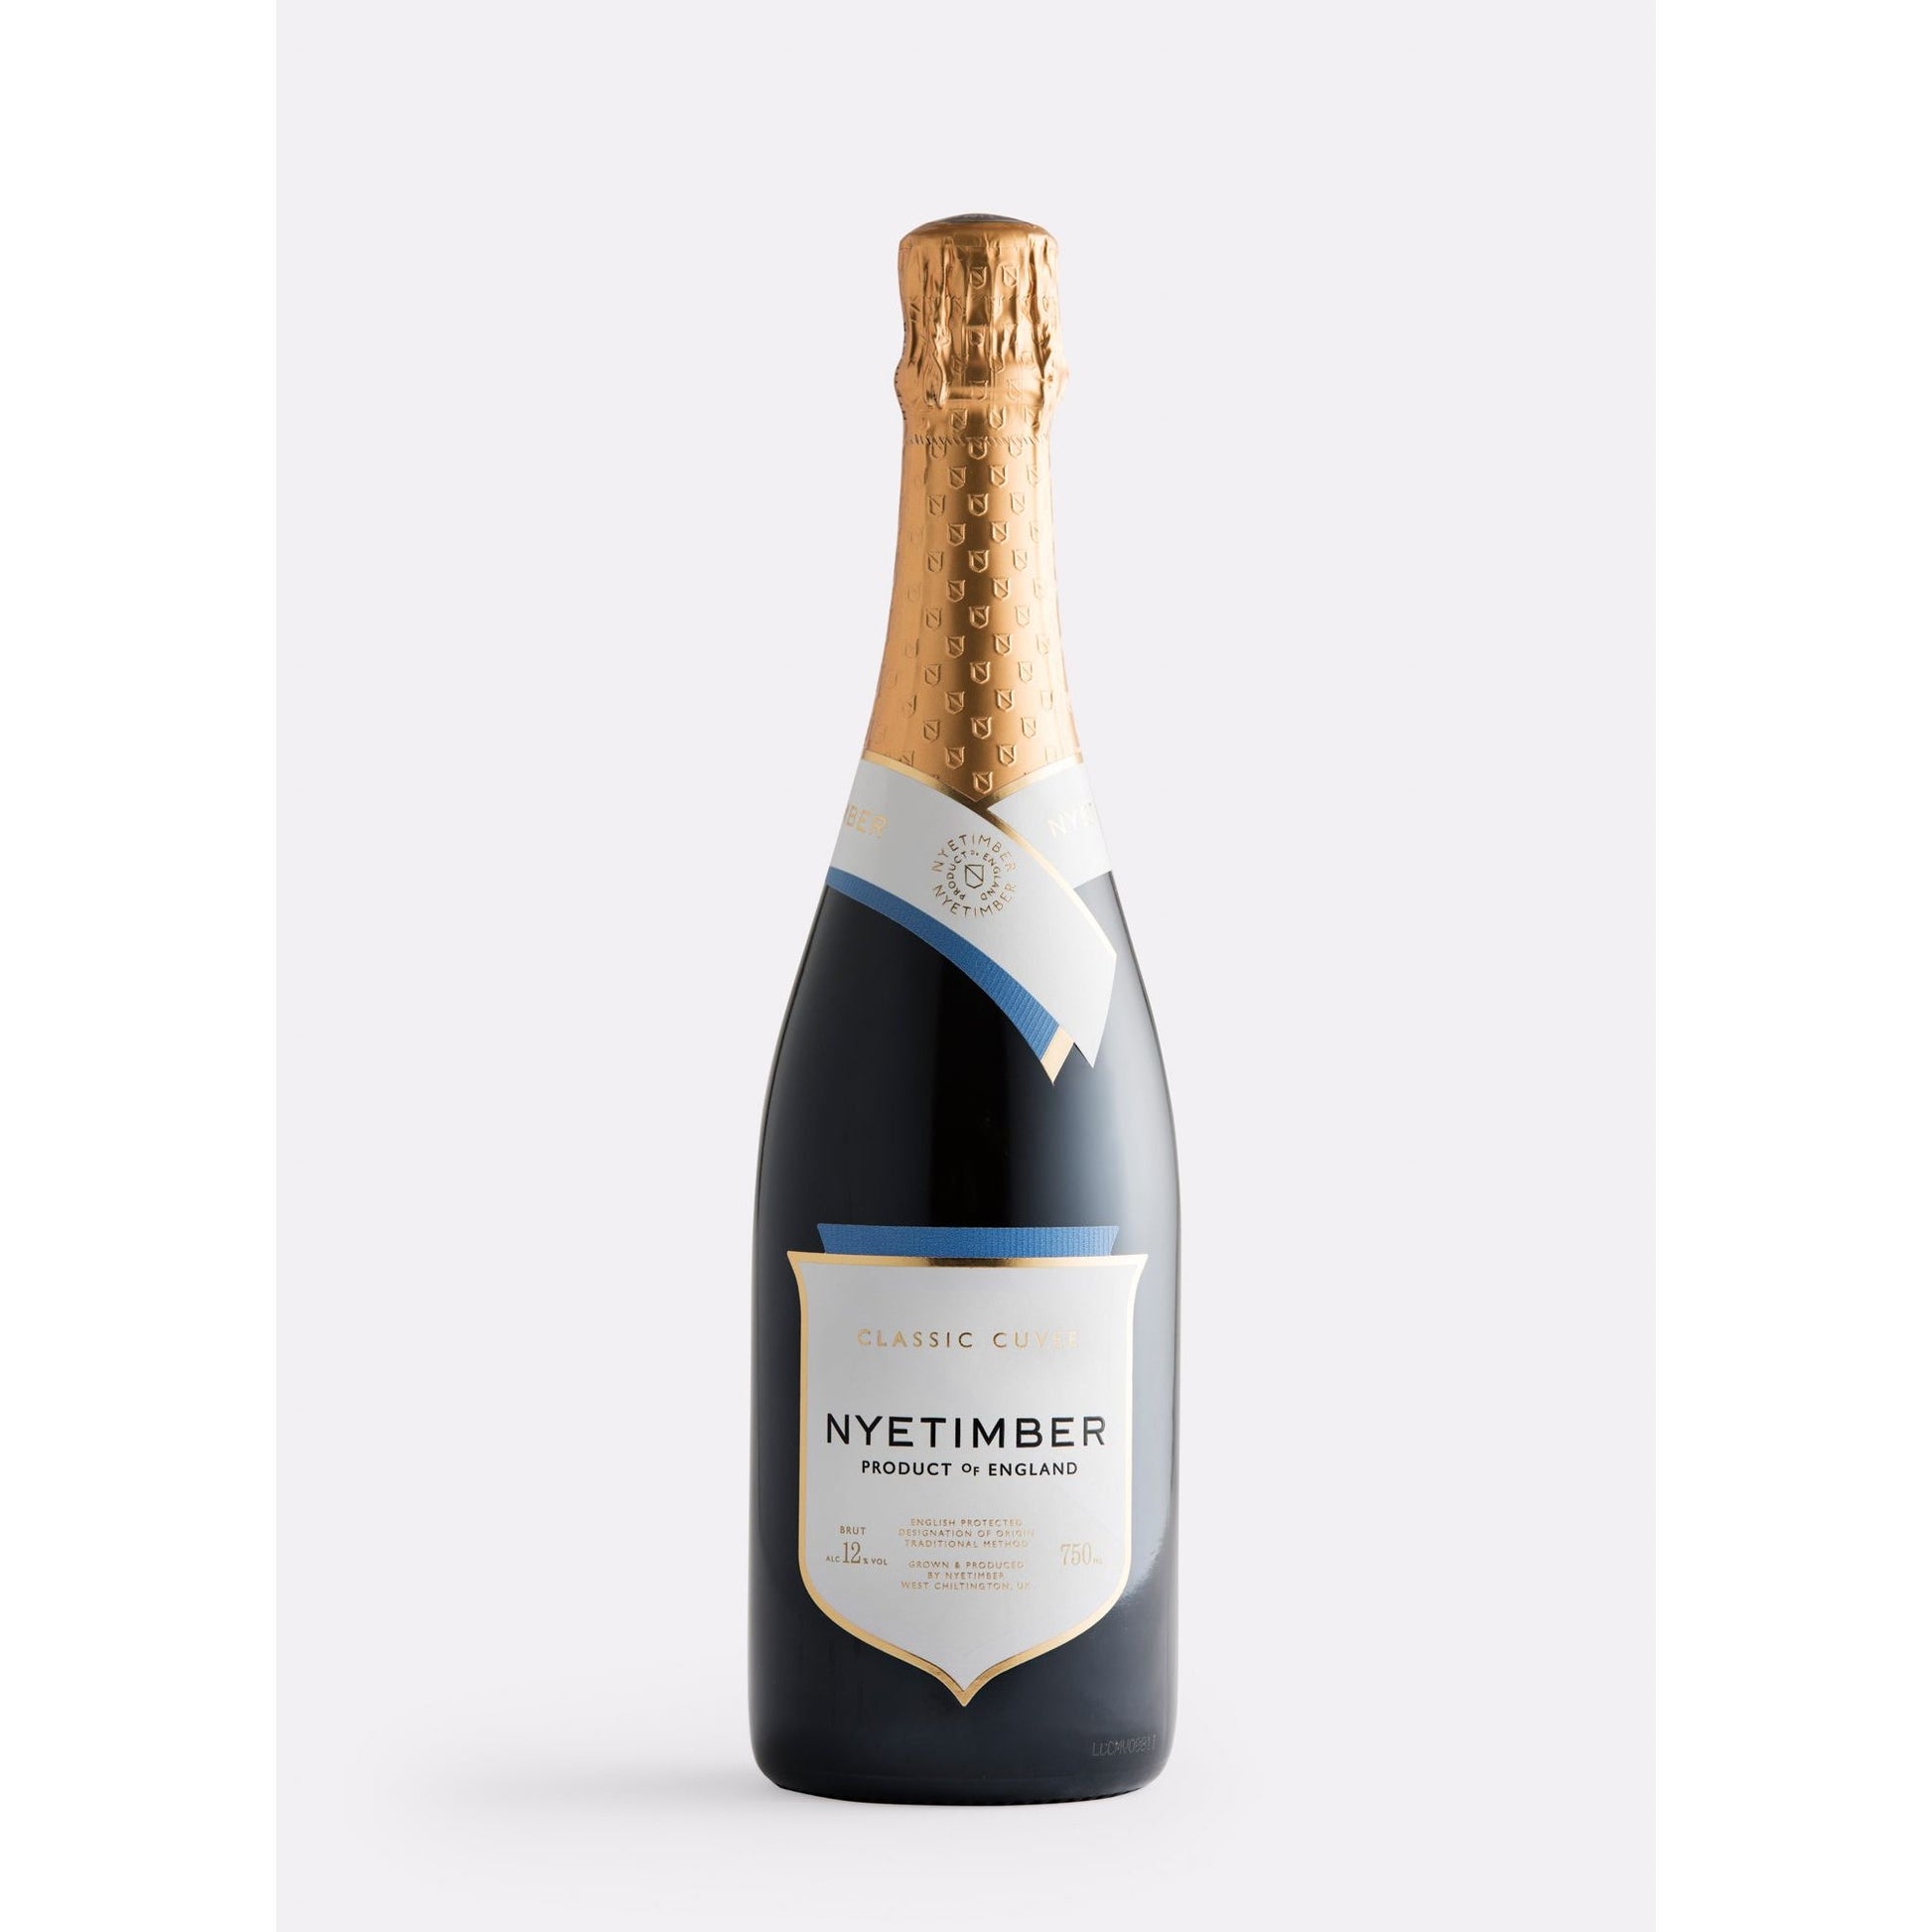 Nyetimber Classic Cuvee Sparkling wine from the English Wine Collection